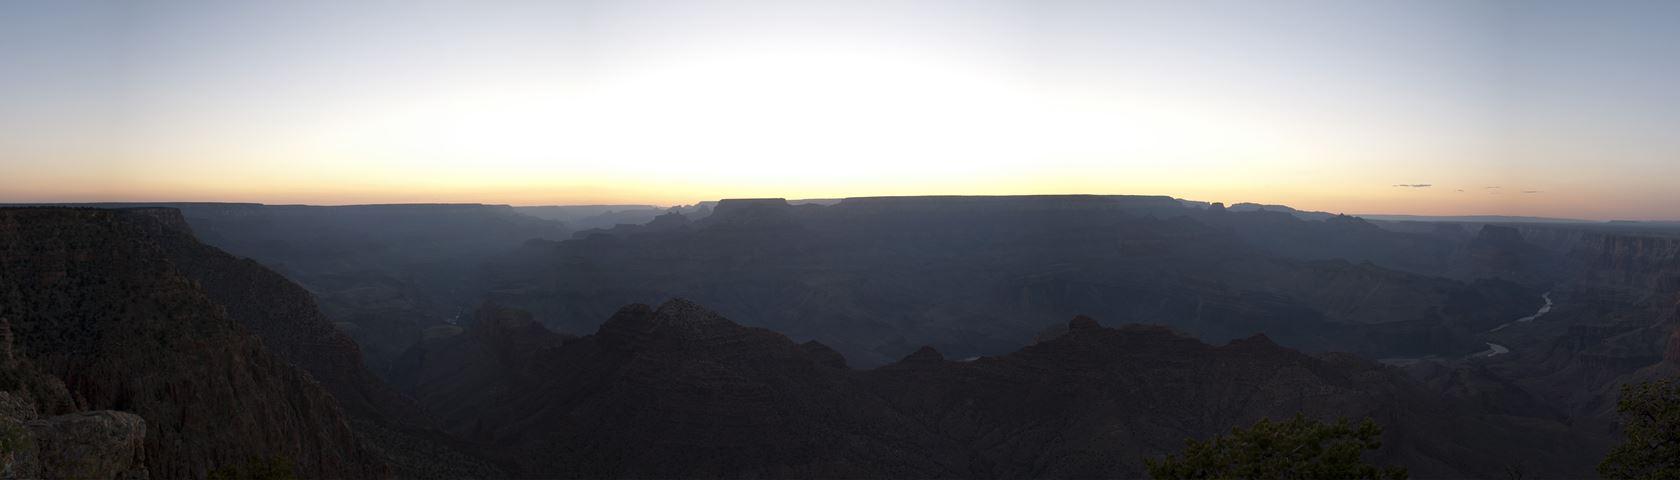 Grand Canyon evening HDR